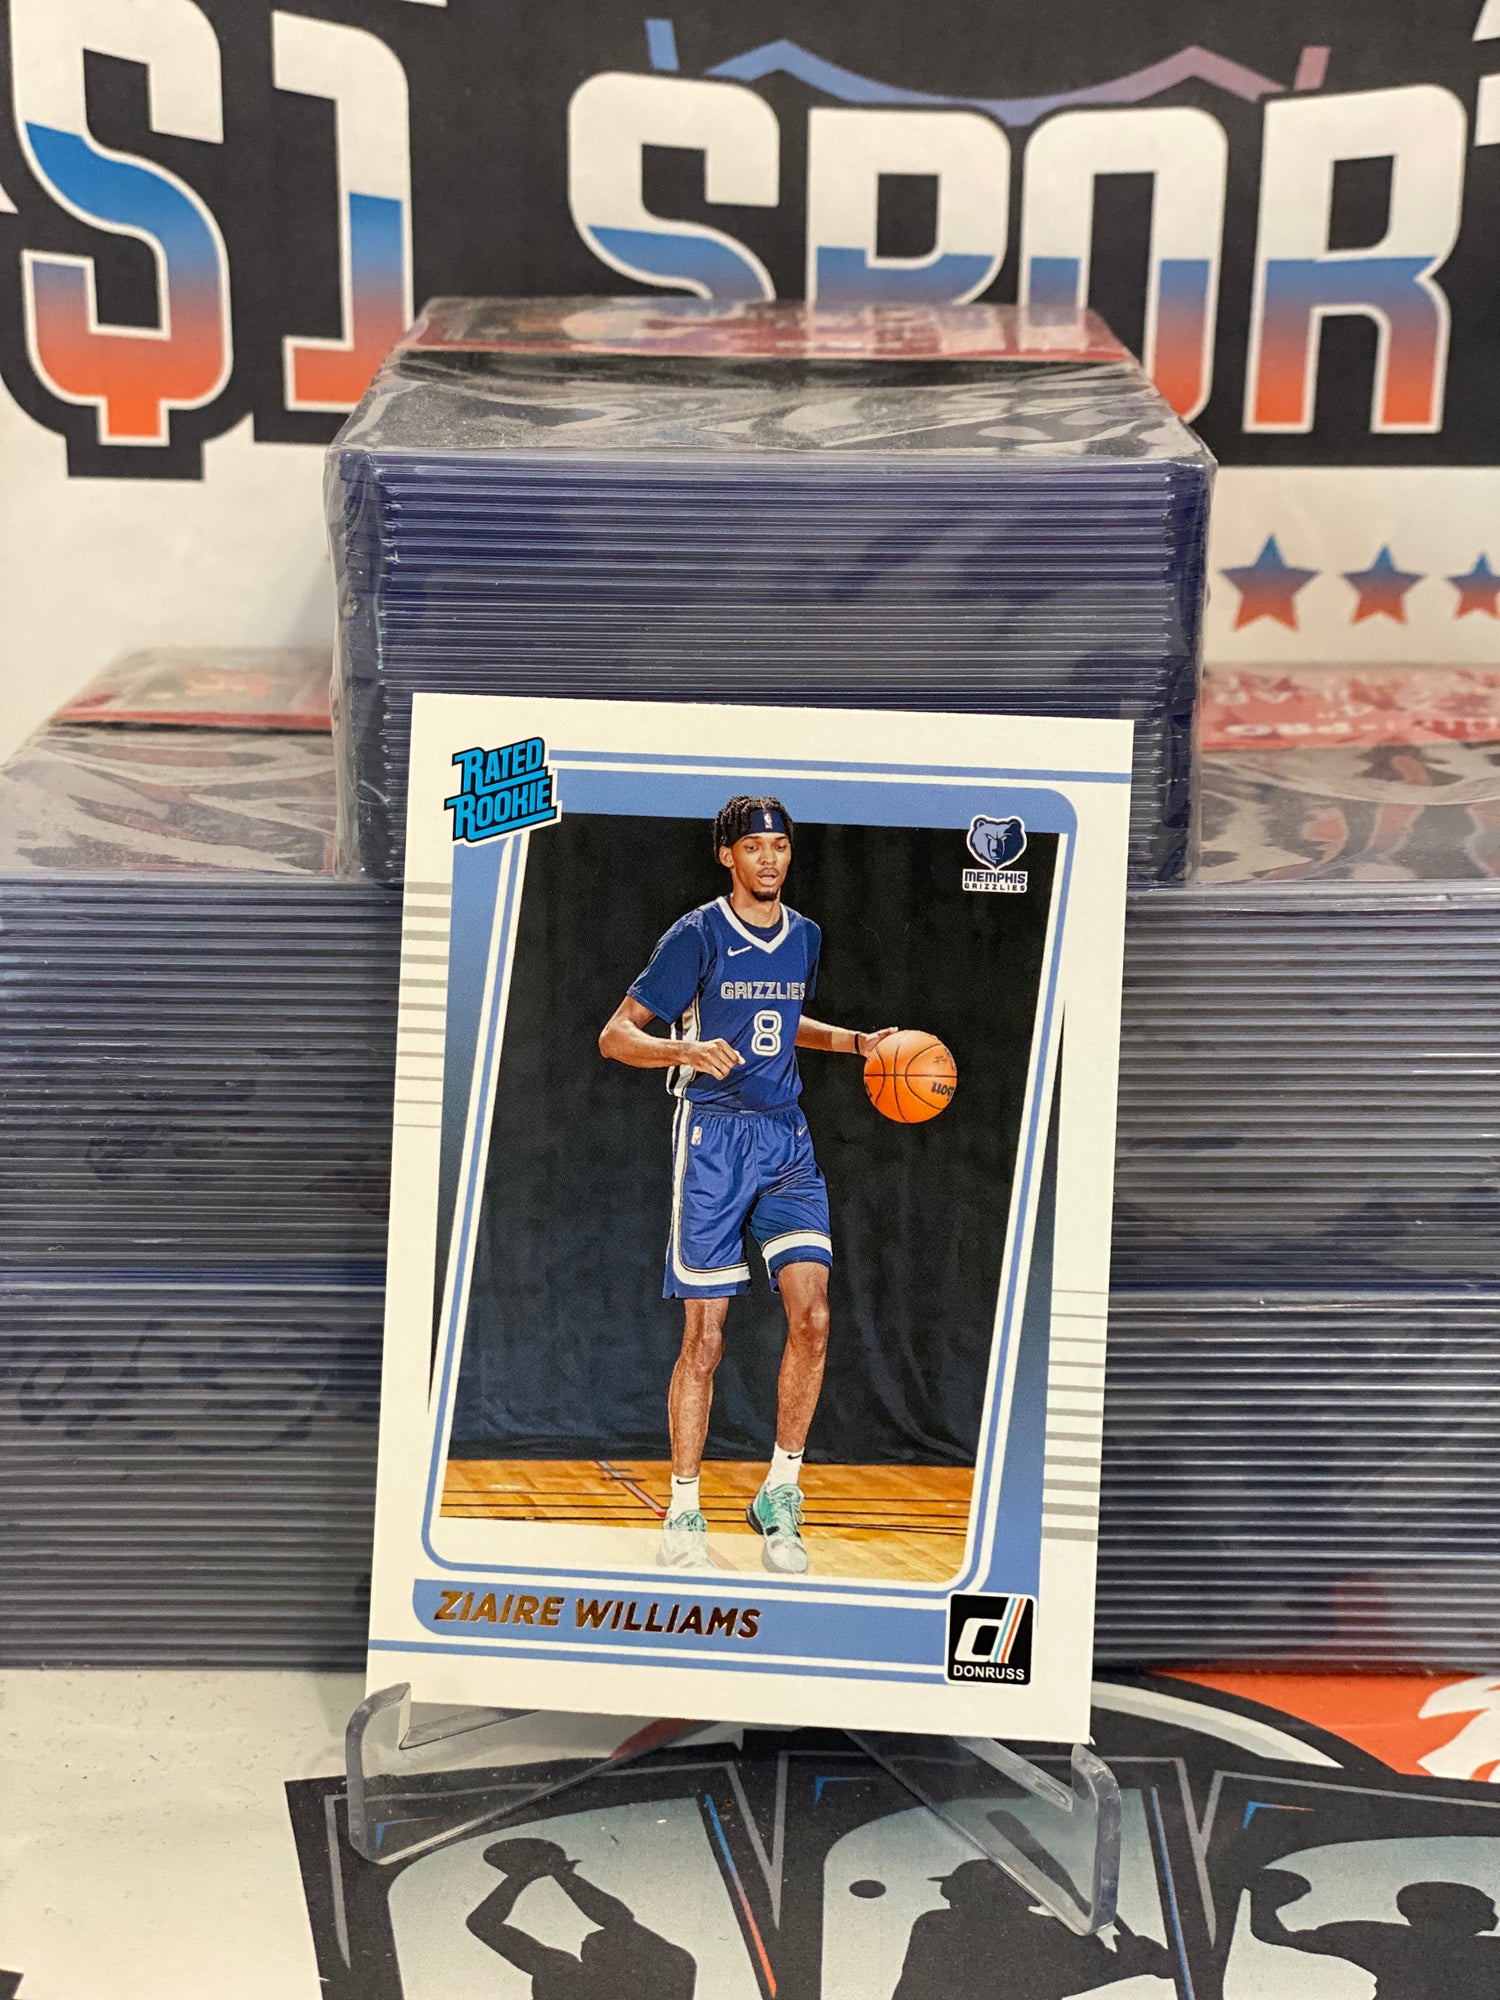 2021 Donruss (Rated Rookie) Ziaire Williams #248